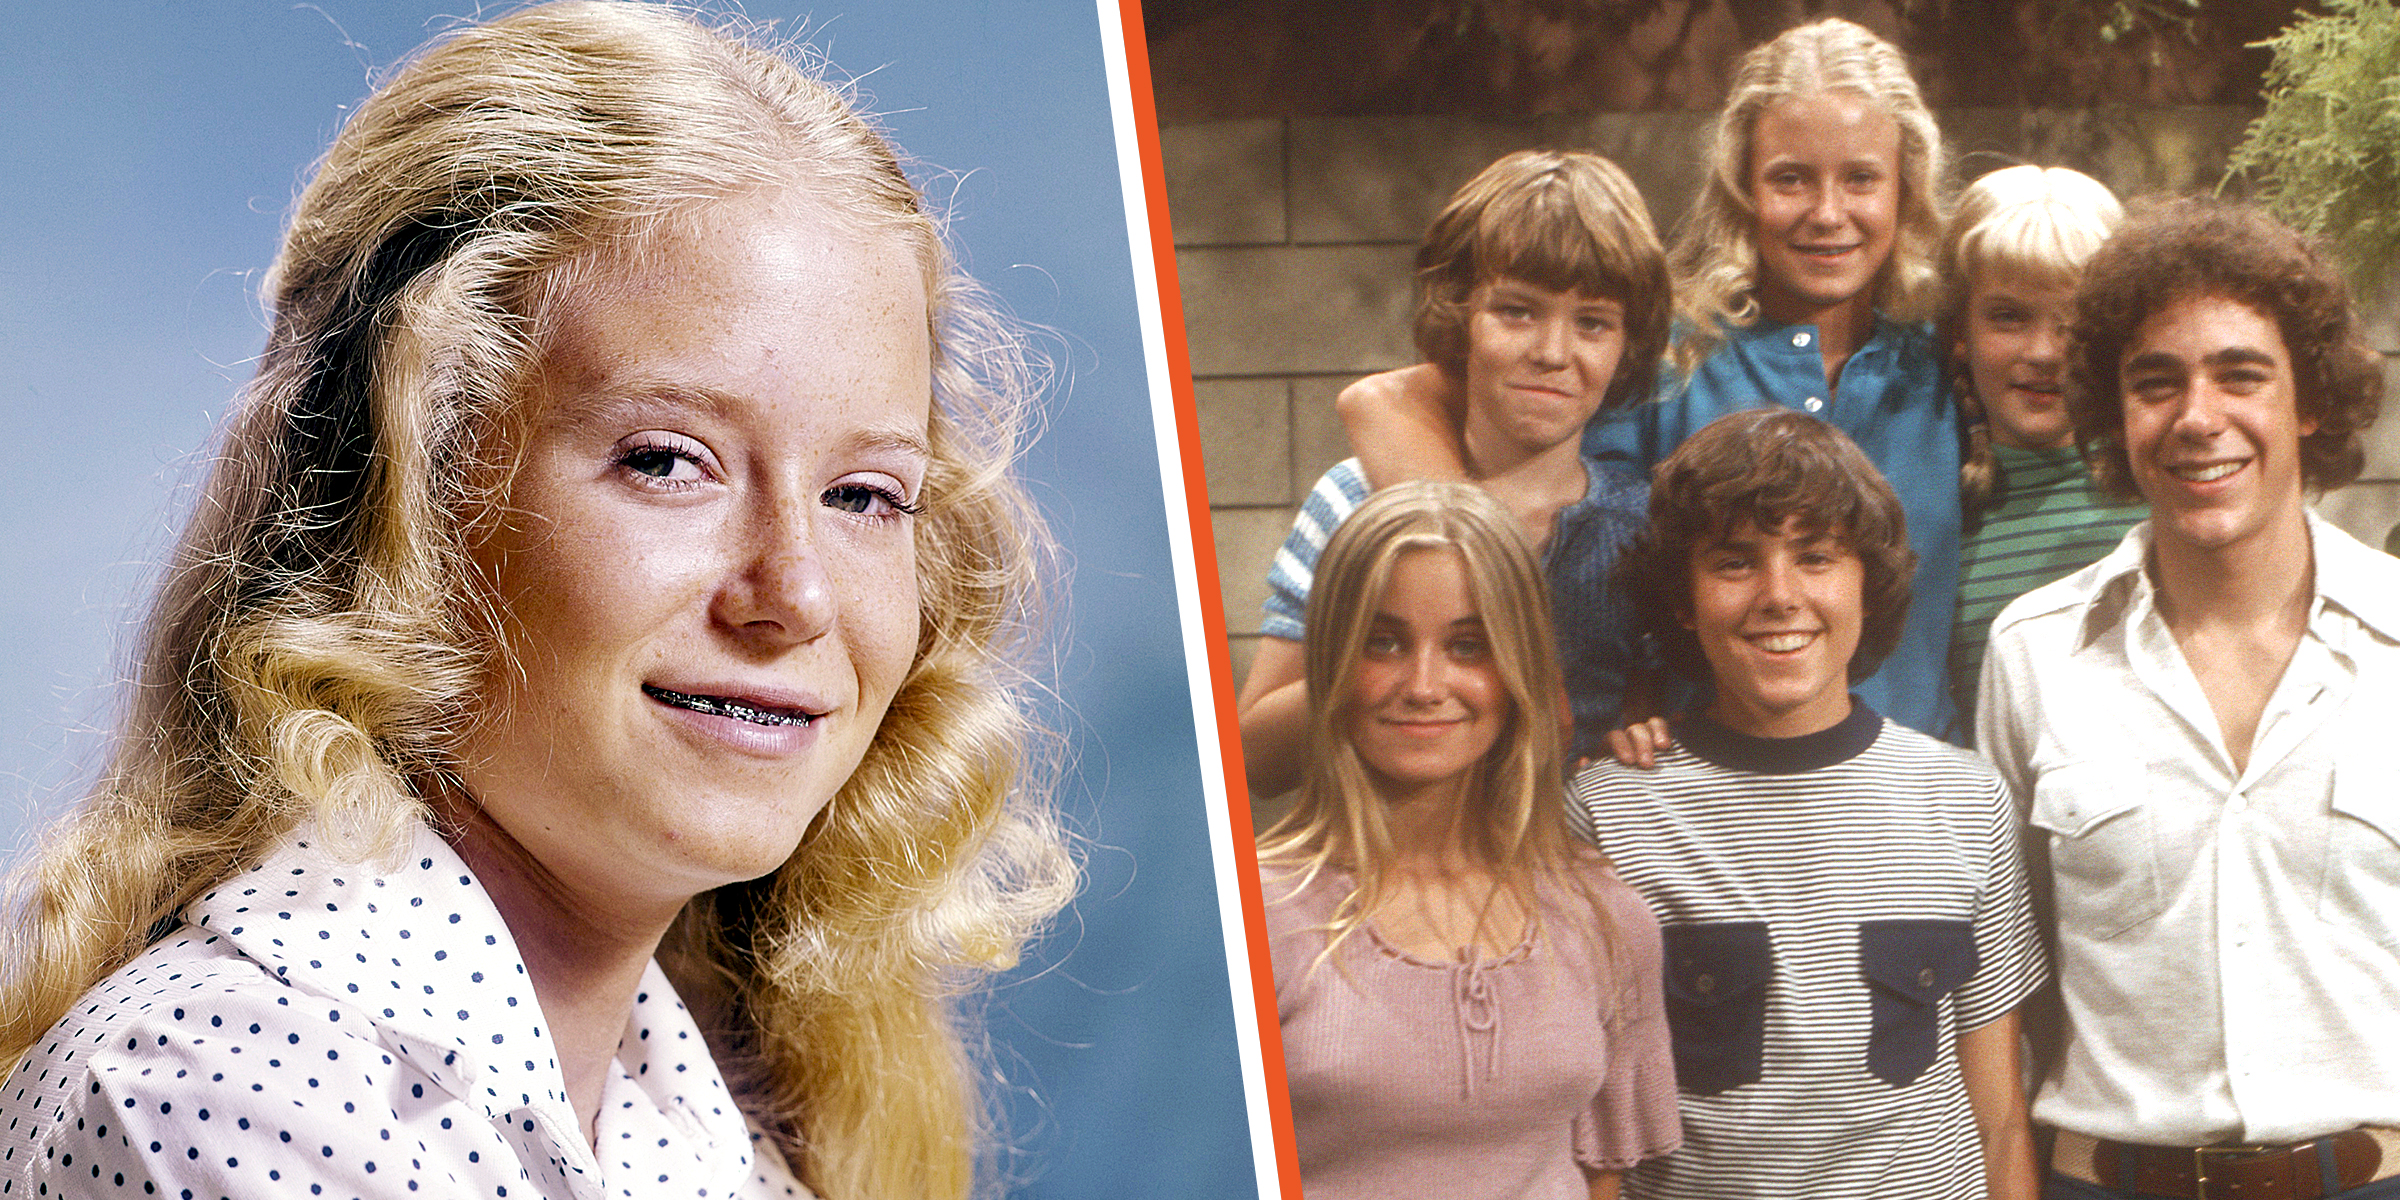 Eve Plumb | Eve Plumb and "The Brady Bunch" cast | Source: Getty Images